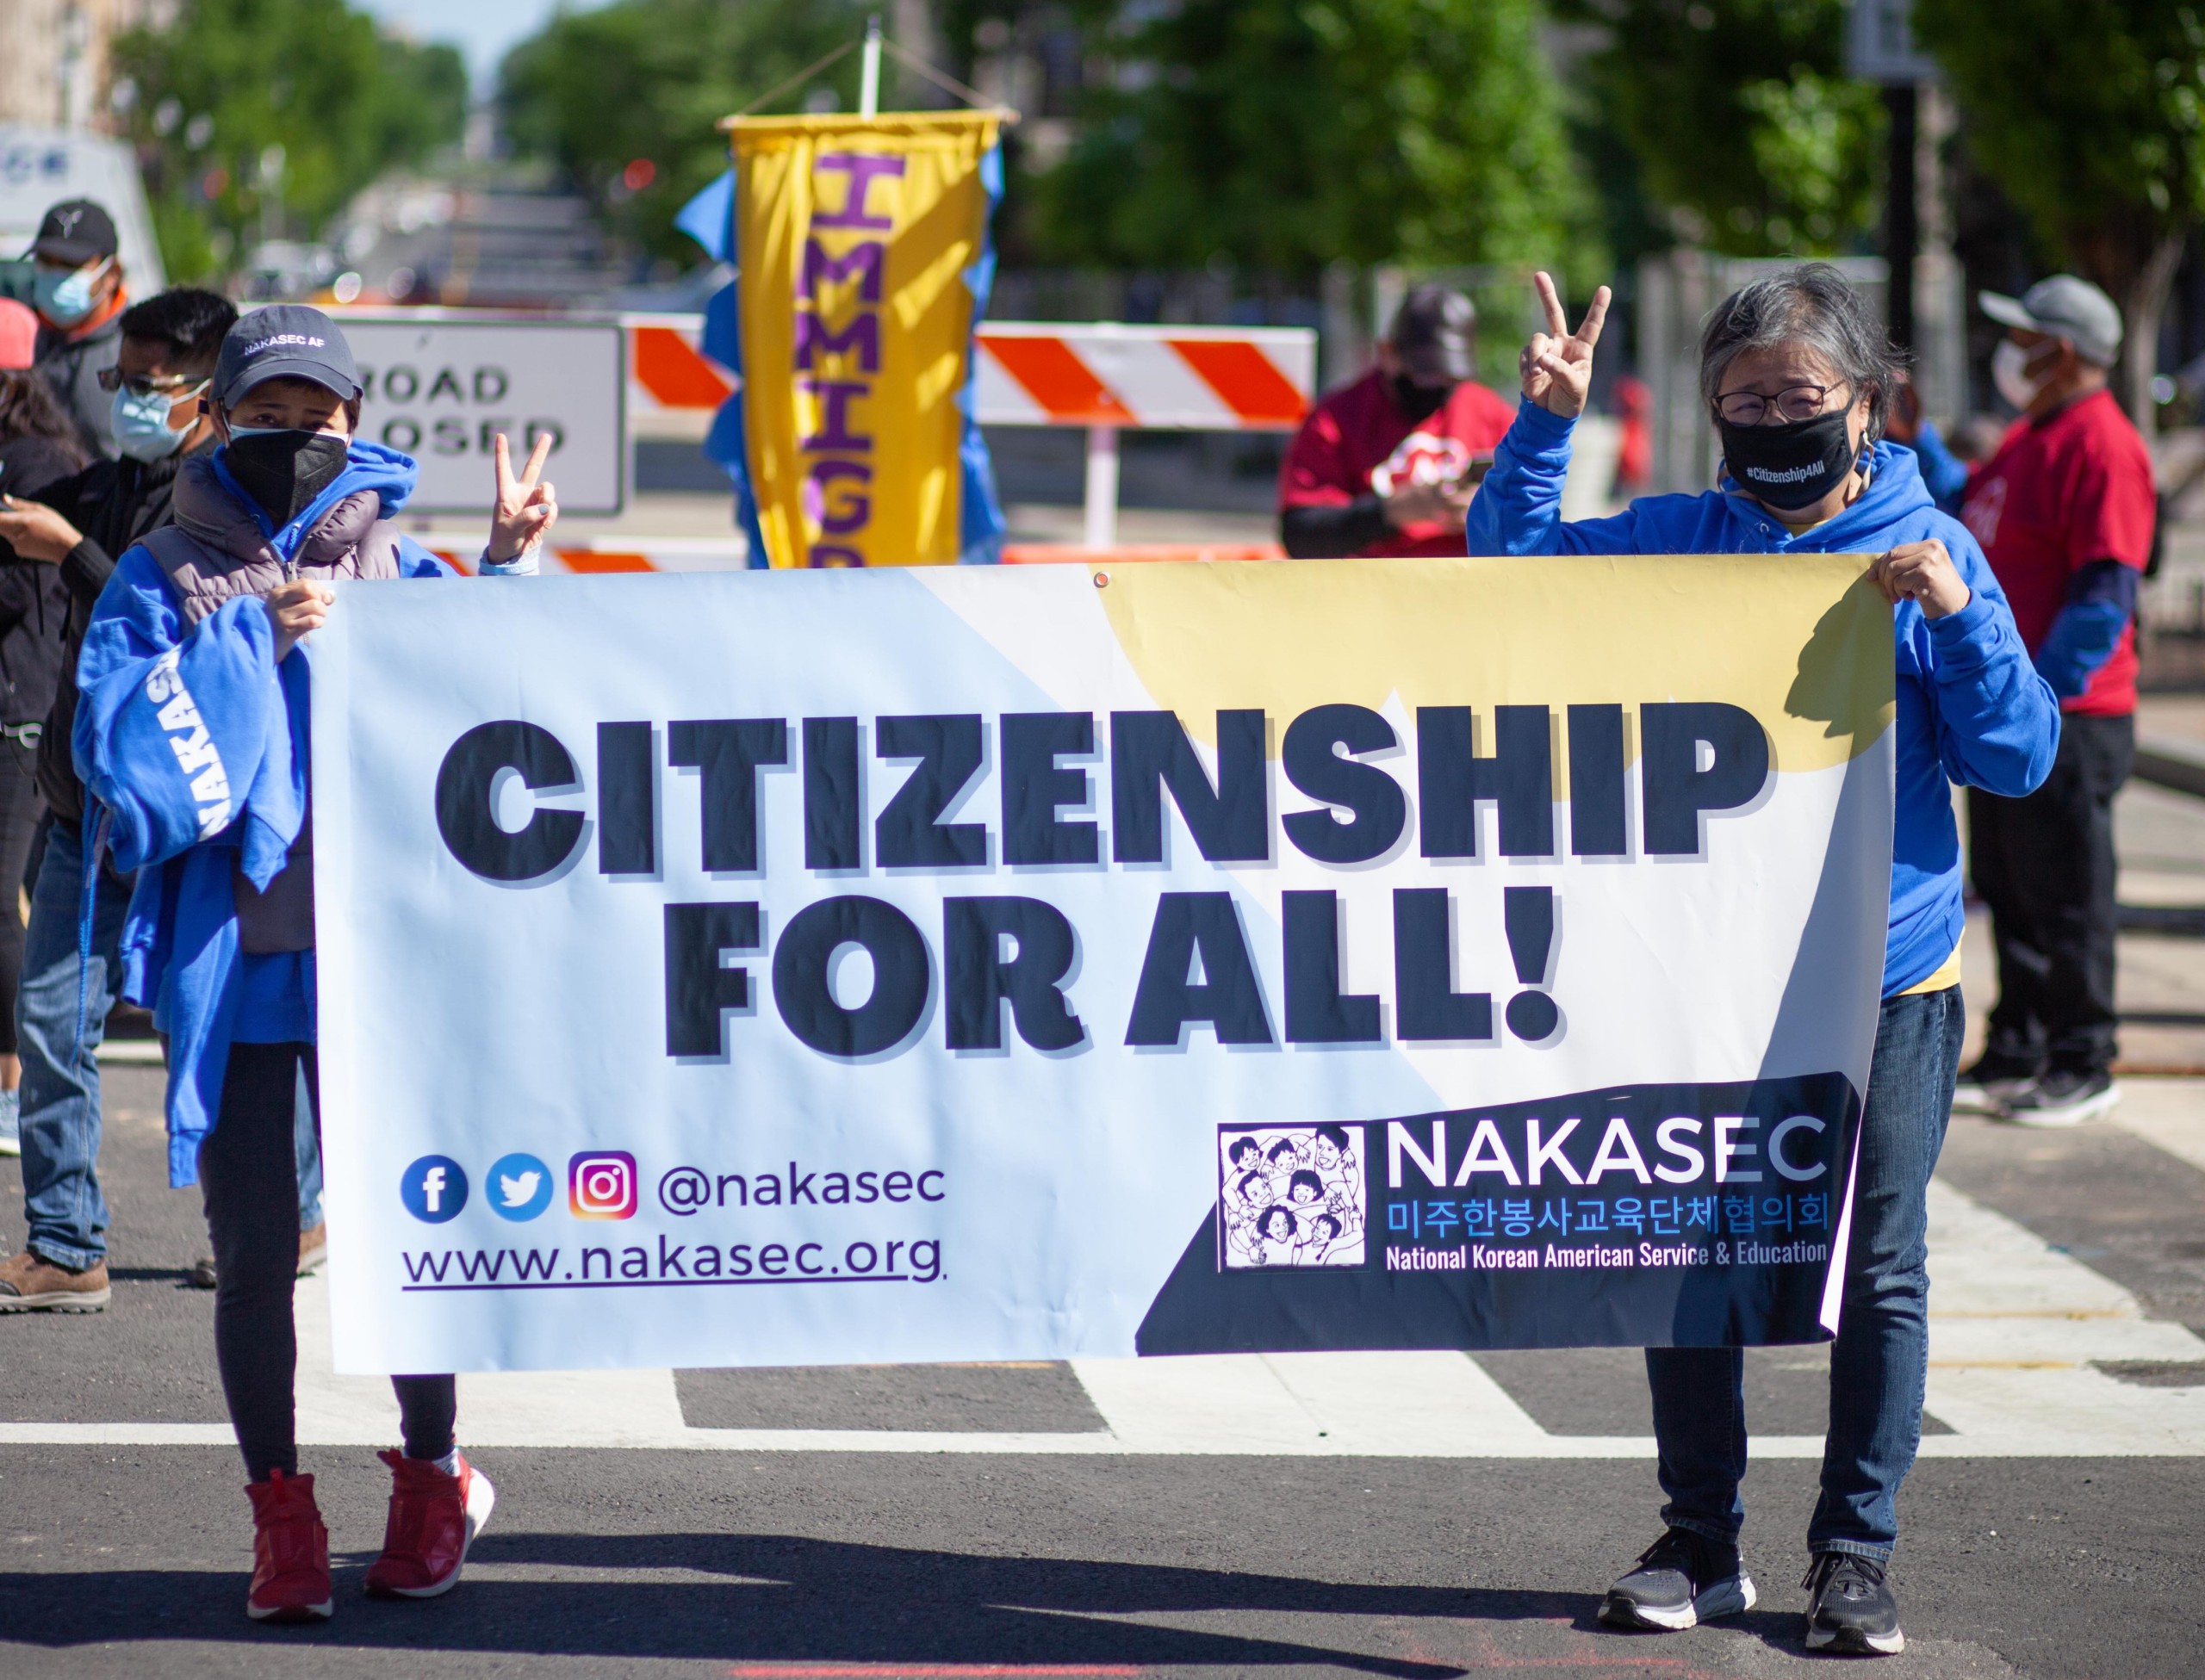 Two individuals at a rally hold up a banner that says "Citizenship for All!"